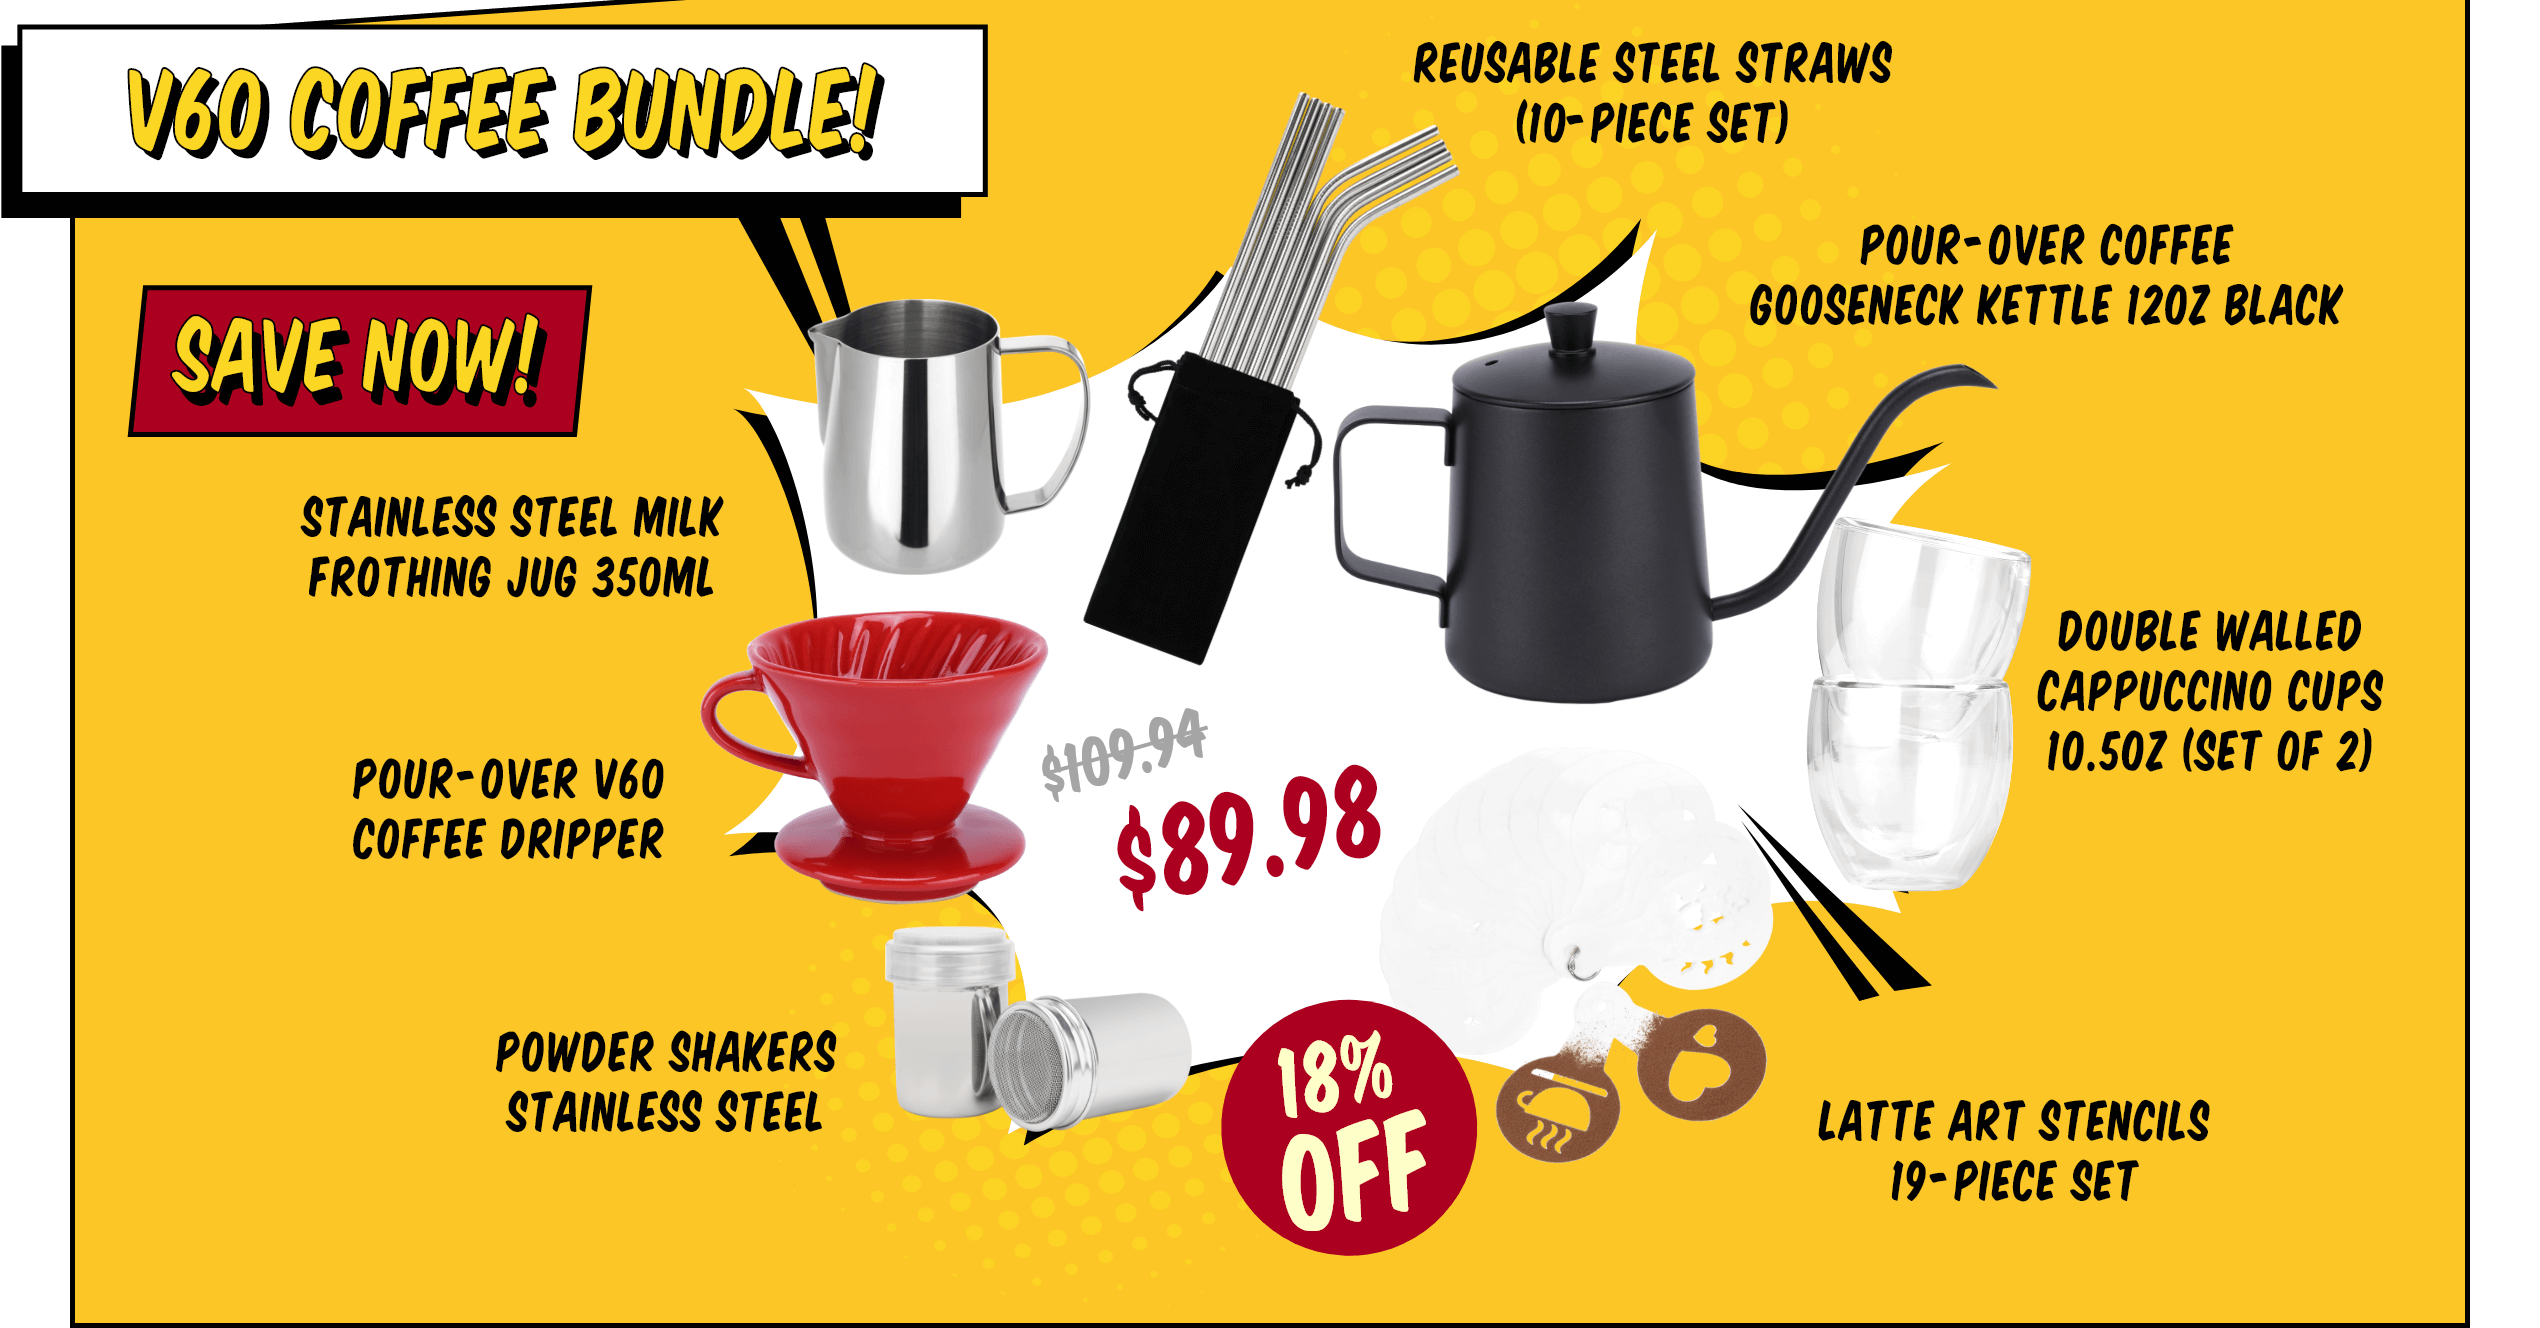 V60 Coffee Bundle with 10-Piece Reusable Steel Straws Set, 12oz Pour-Over Coffee Gooseneck Kettle in Black color, 2  Double Walled Cappuccino Cups set  at 10.5oz, 19-Piece Latte Art Stencils Set, Stainless Steel Powder Shakers, Pour-Over V60 Coffee Dripper, Stainless Steel Milk Frothing Jug at 350ml, Save now with 18% off! 